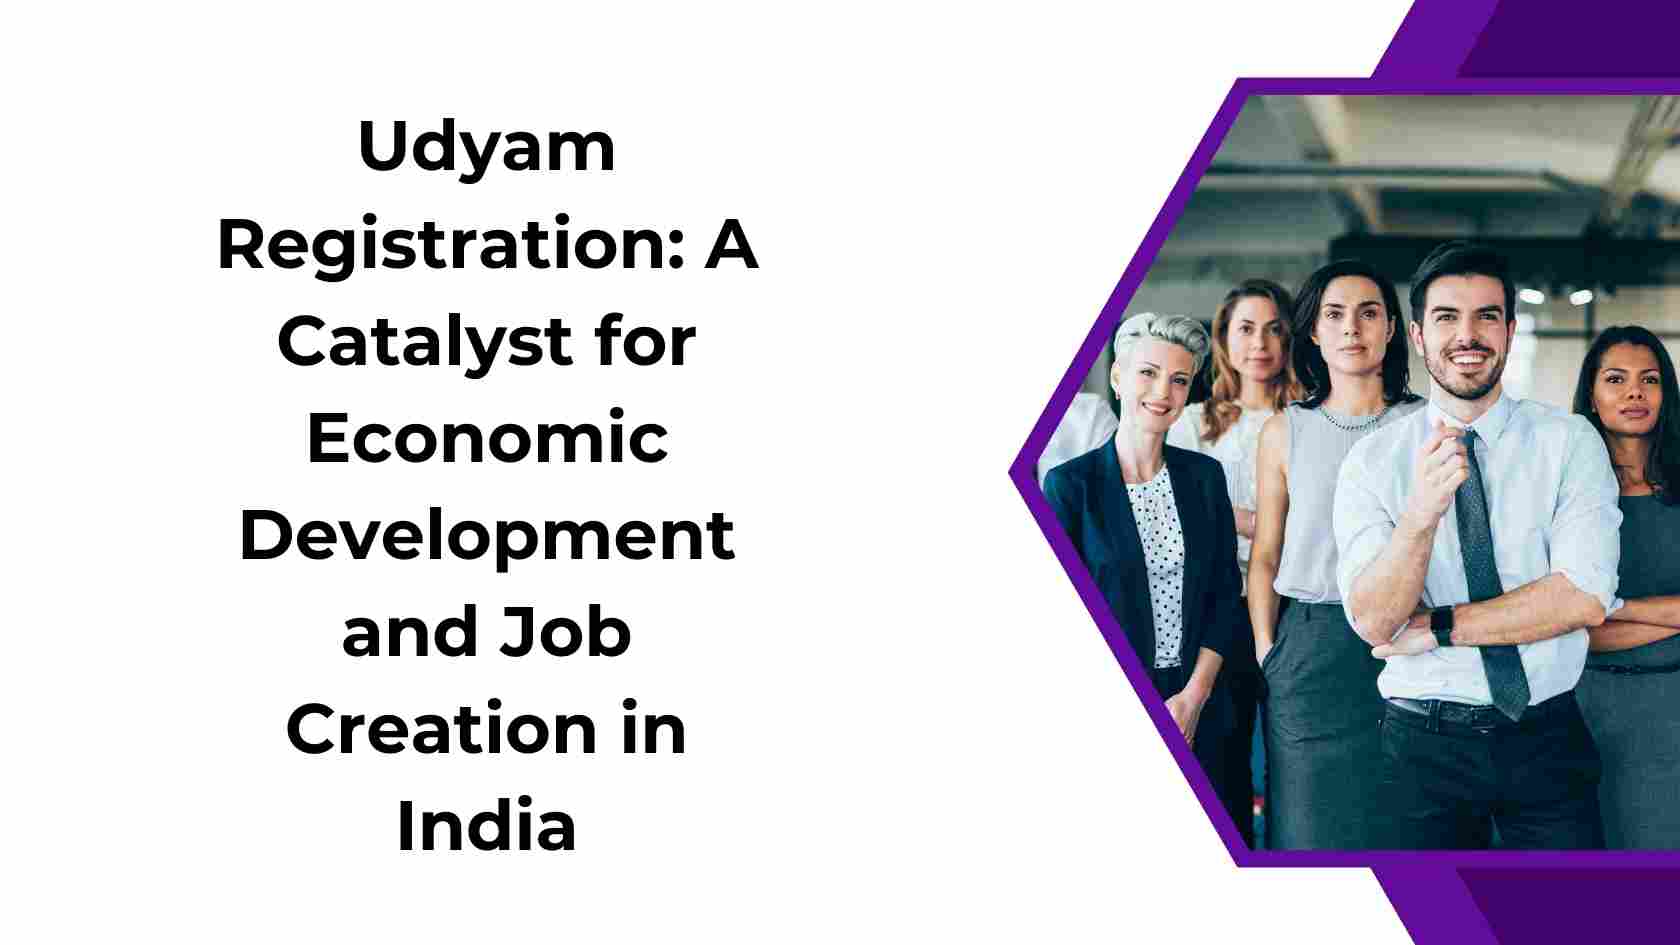 Udyam Registration: A Catalyst for Economic Development and Job Creation in India